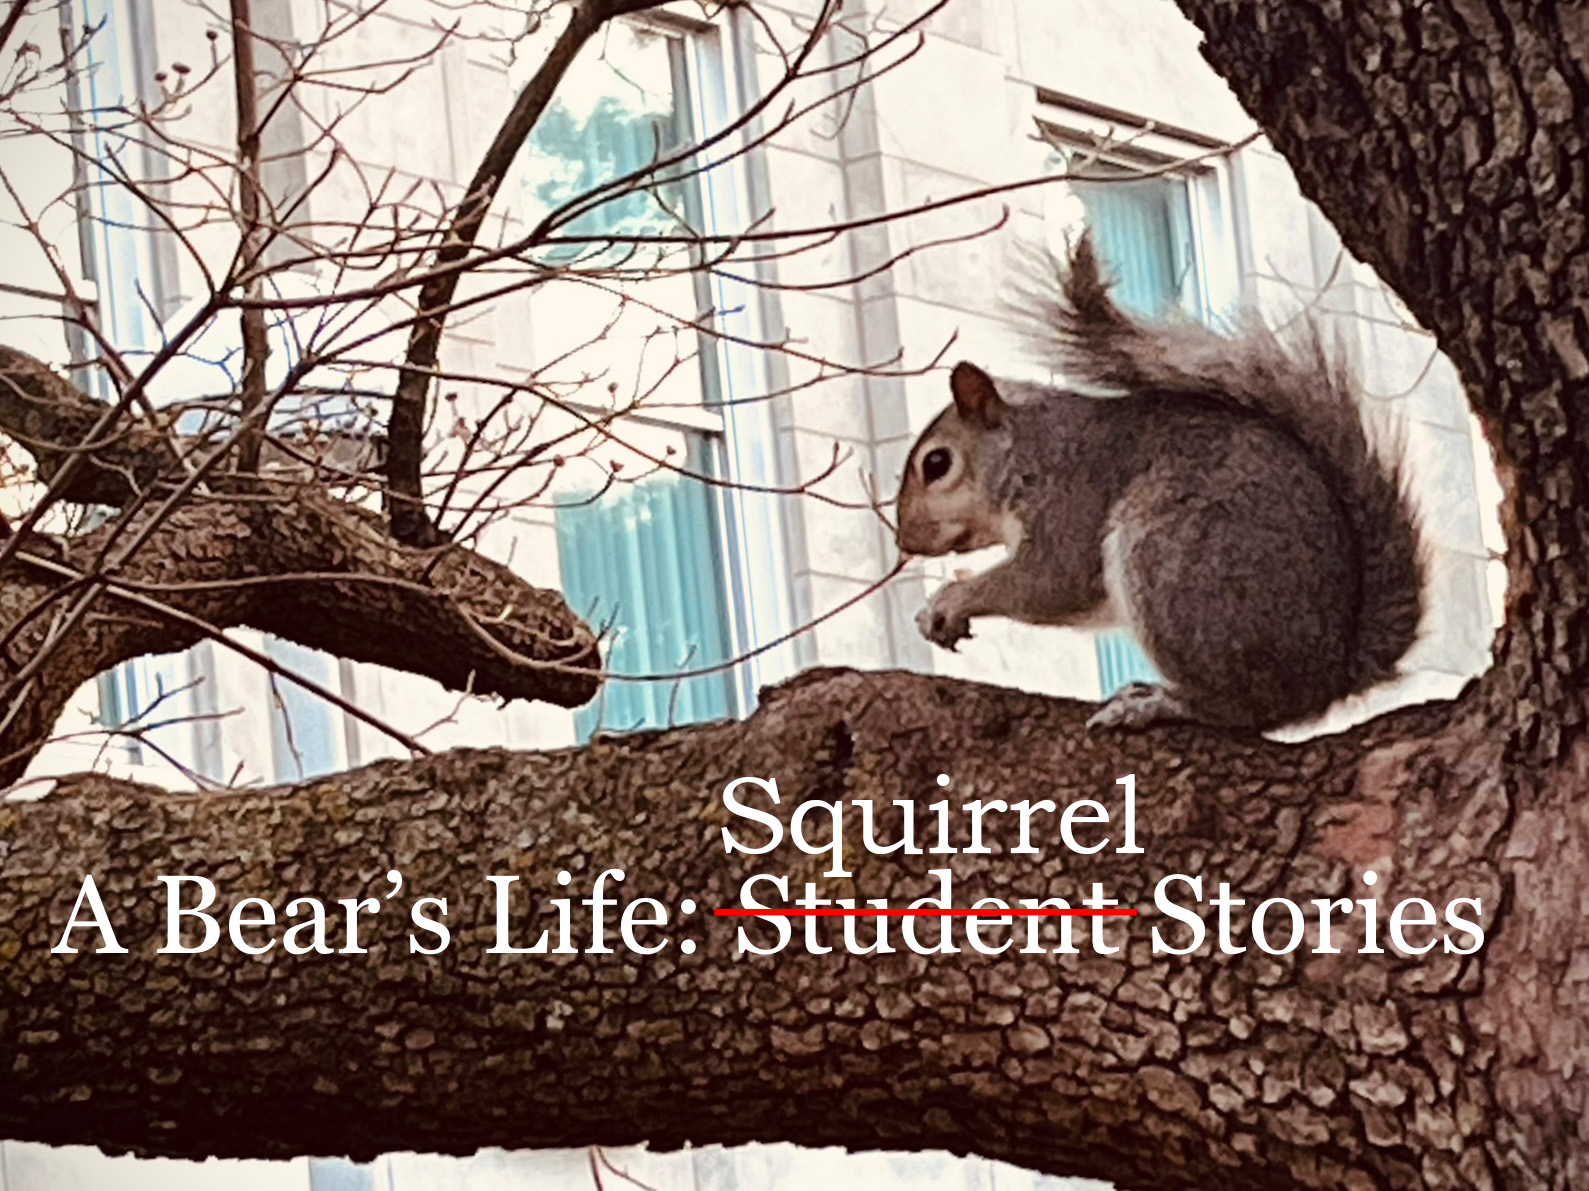 A squirrel sitting in a tree. Text says "A Bear's Life: Student Stories", but Student is crossed out with "Squirrel" written above it.